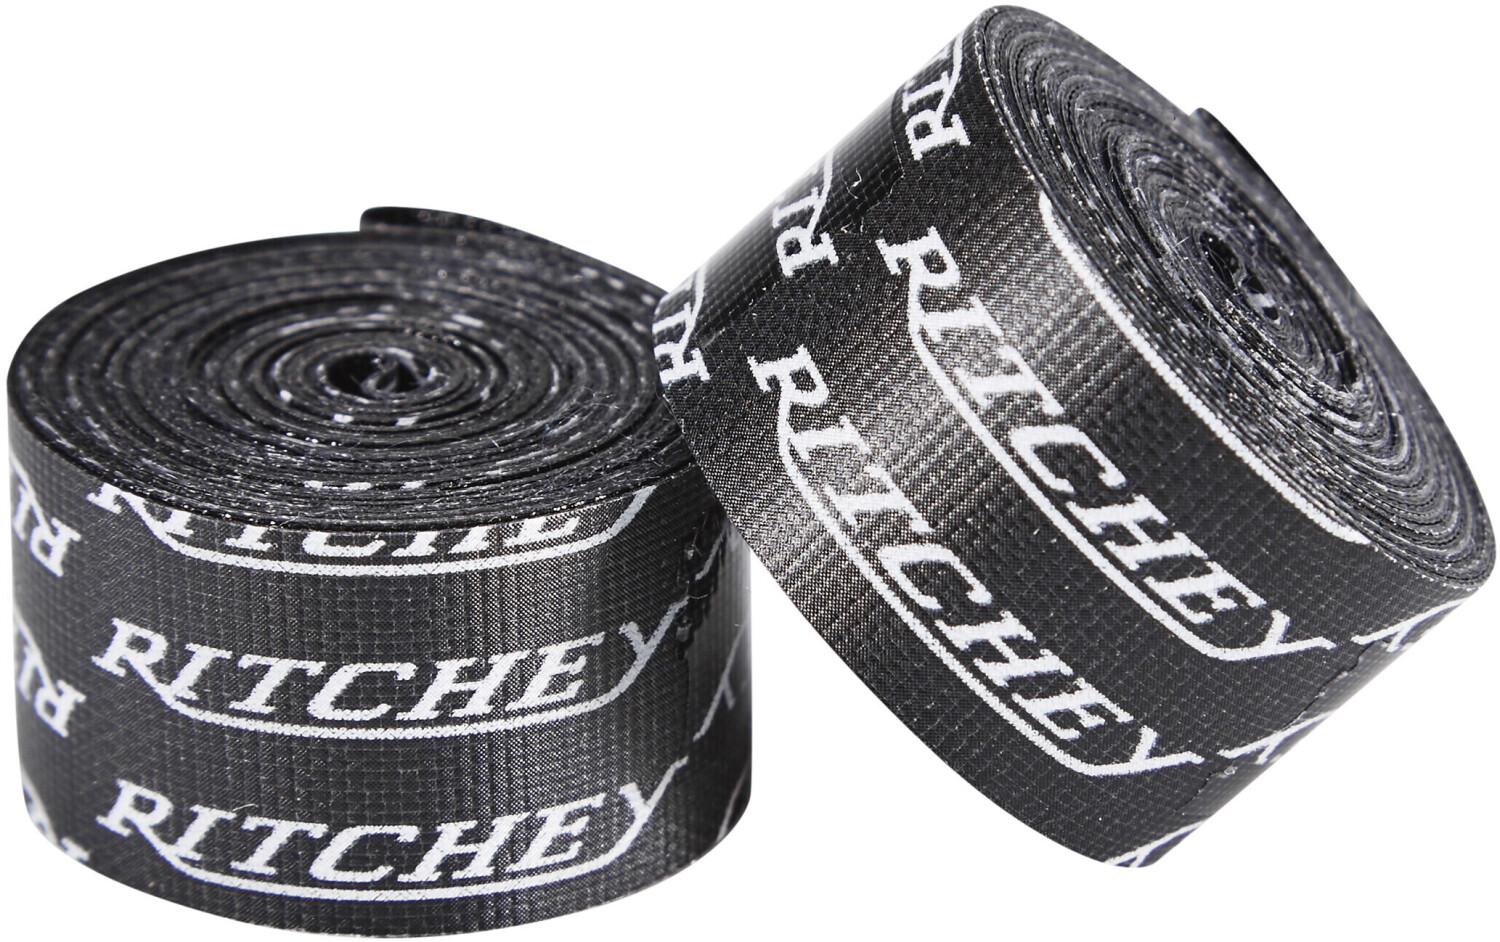 Photos - Bike Accessories Ritchey Pro Snap On Rim tape 27,5 inches 2 pieces black 23 